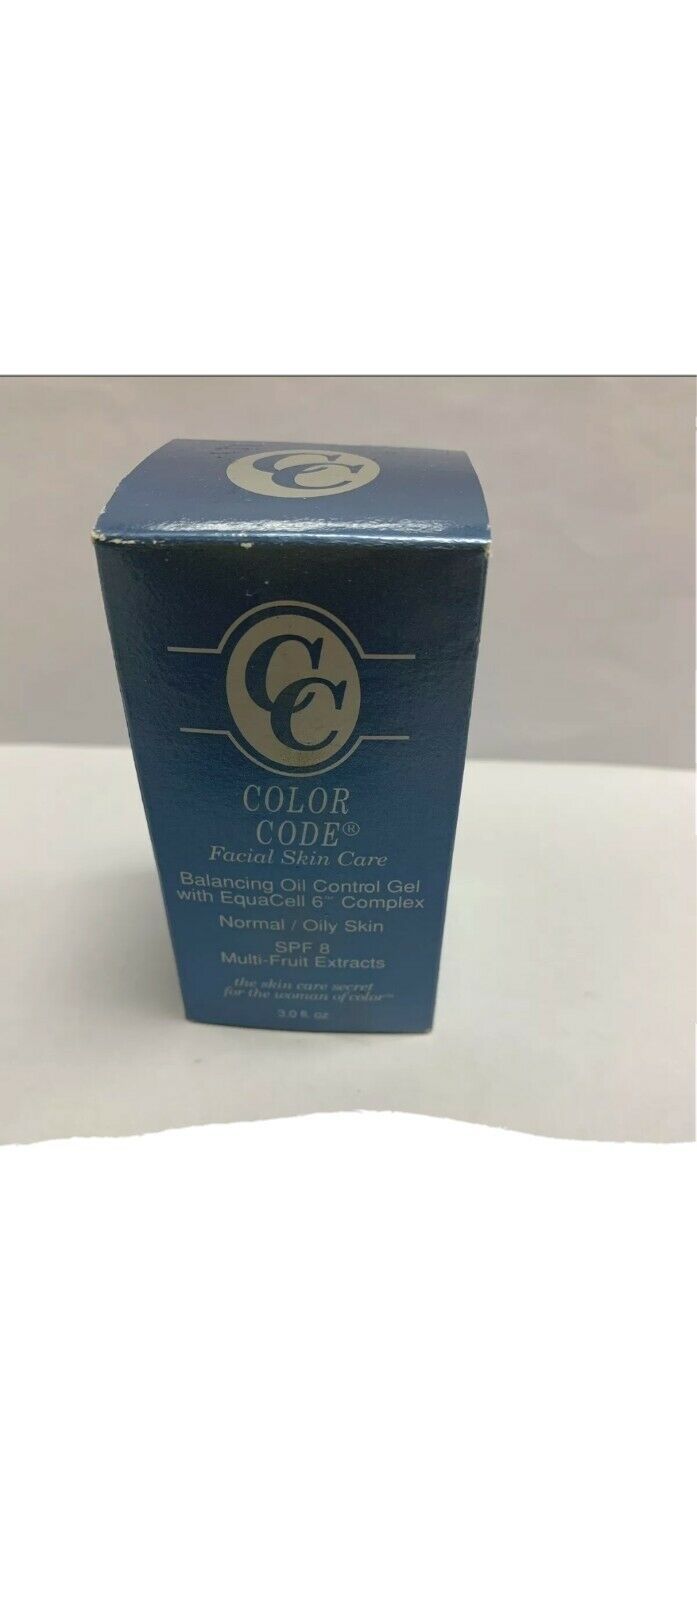 Primary image for Color Code Facial Skin Care Balancing Oil Control Gel With EquaCell 6 Complex